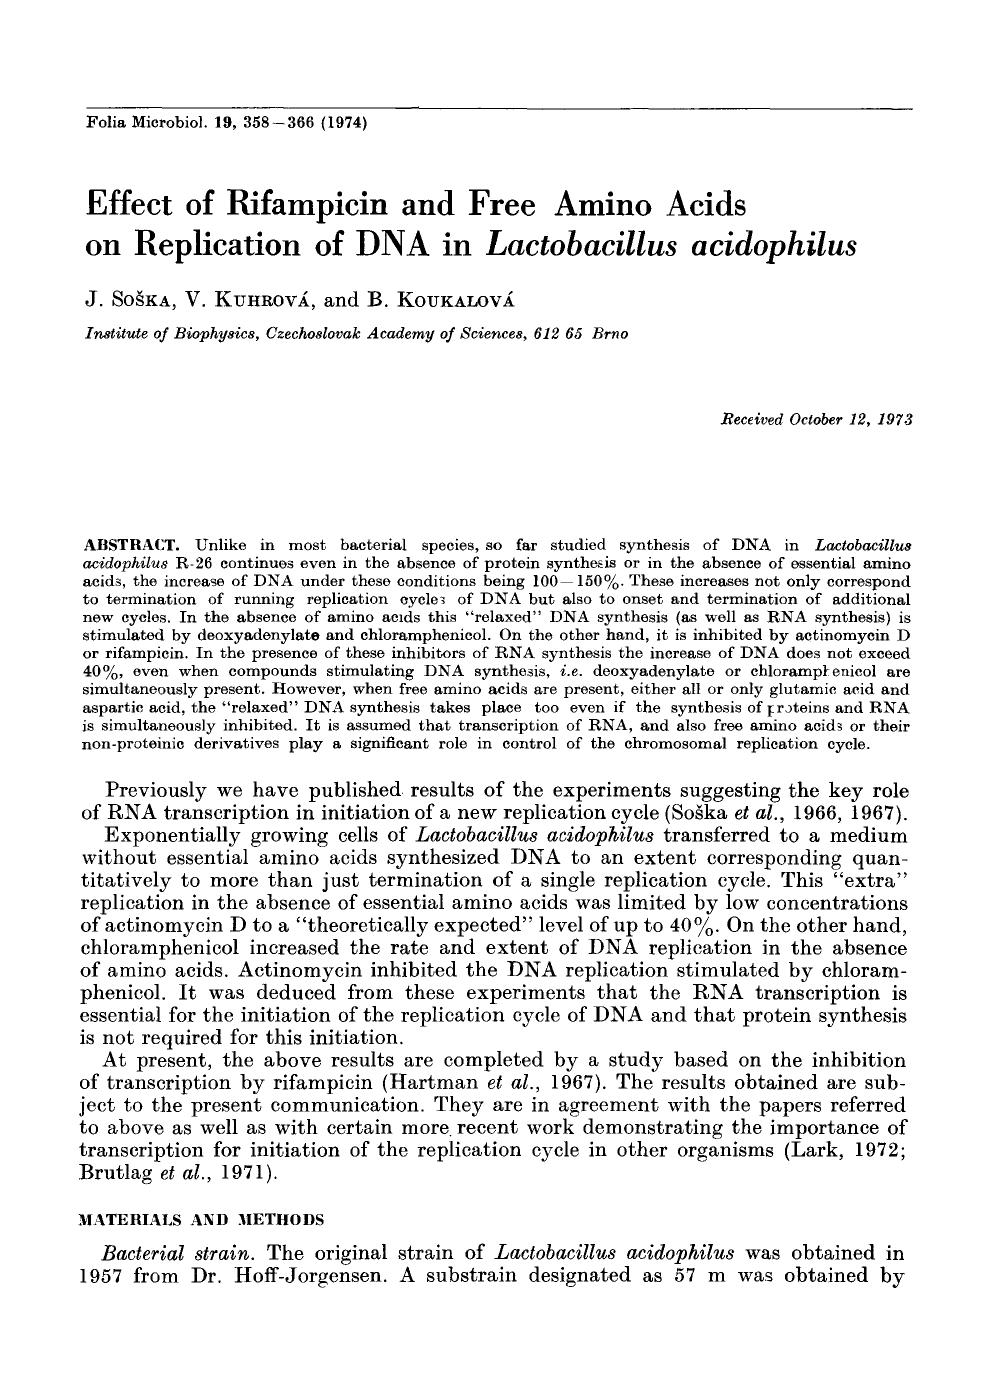 Effect of rifampicin and free amino acids on replication of DNA in <Emphasis Type="Italic">Lactobacillus acidophilus <Emphasis> by Unknown